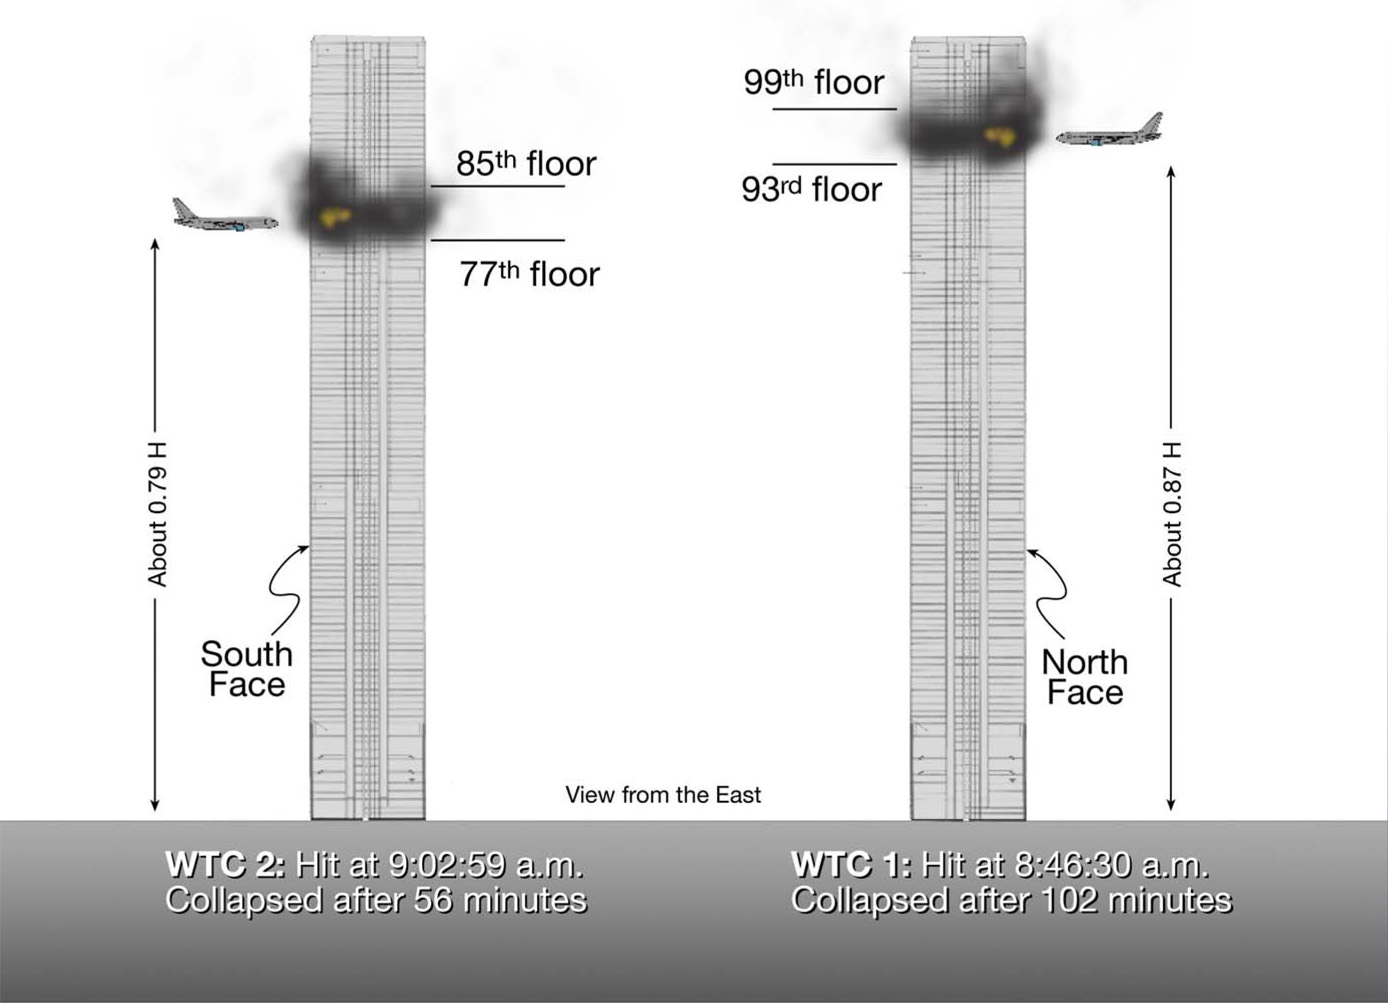 http://upload.wikimedia.org/wikipedia/commons/c/c1/World_Trade_Center_9-11_Attacks_Illustration_with_Vertical_Impact_Locations.jpg